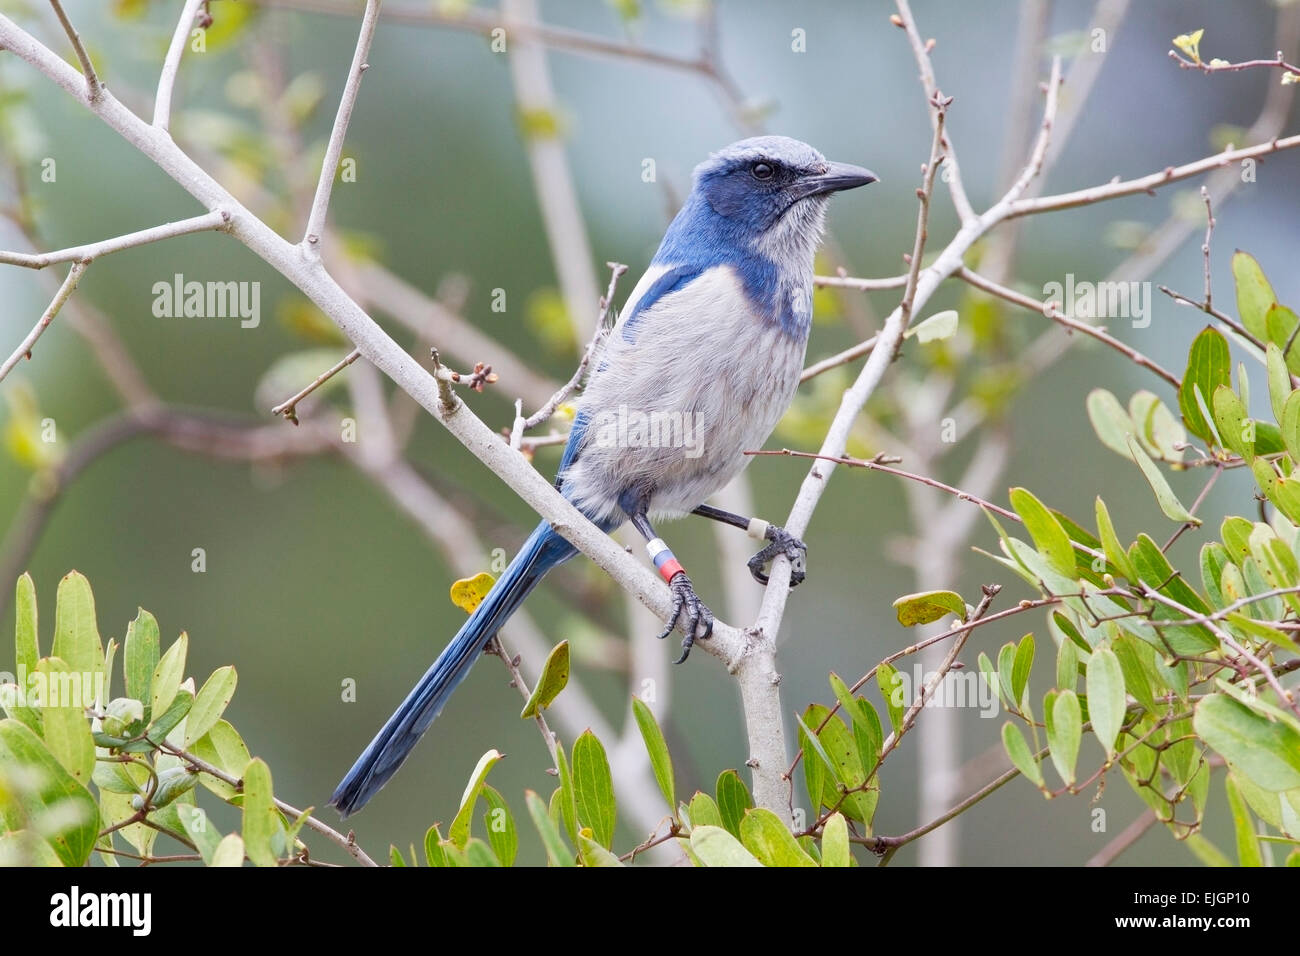 Florida Scrub Jay (Aphelocoma coerulescens) adult wearing scientific bands, perched in vegetation, Florida, USA Stock Photo